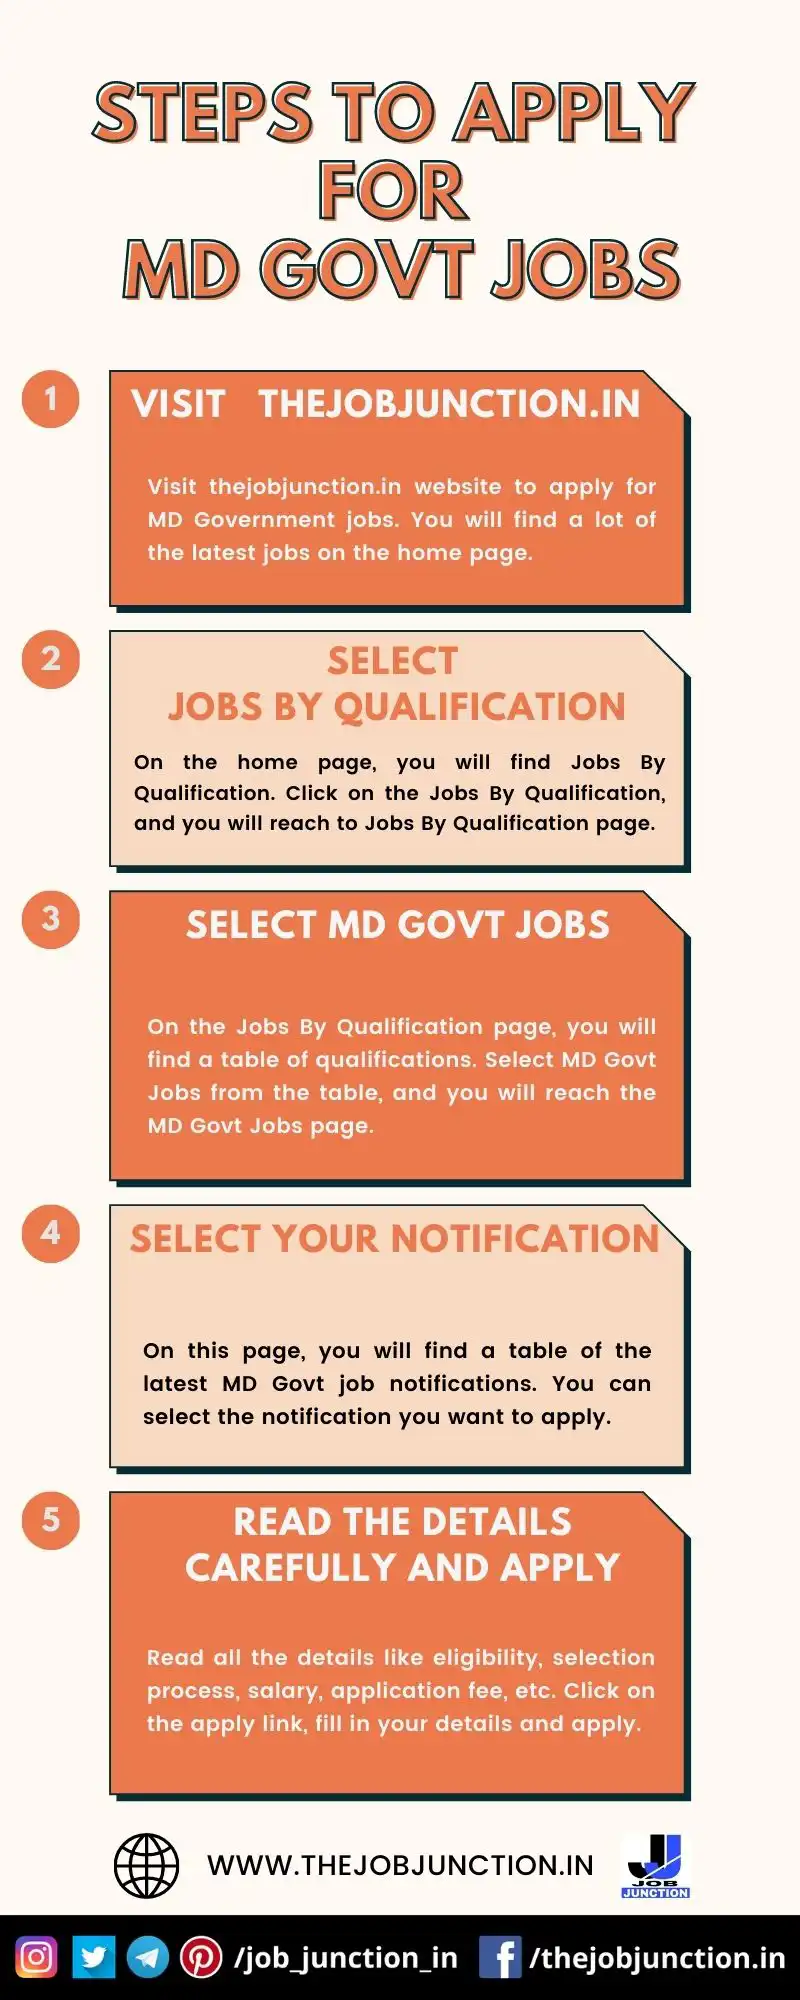 STEPS TO APPLY FOR MD GOVT JOBS